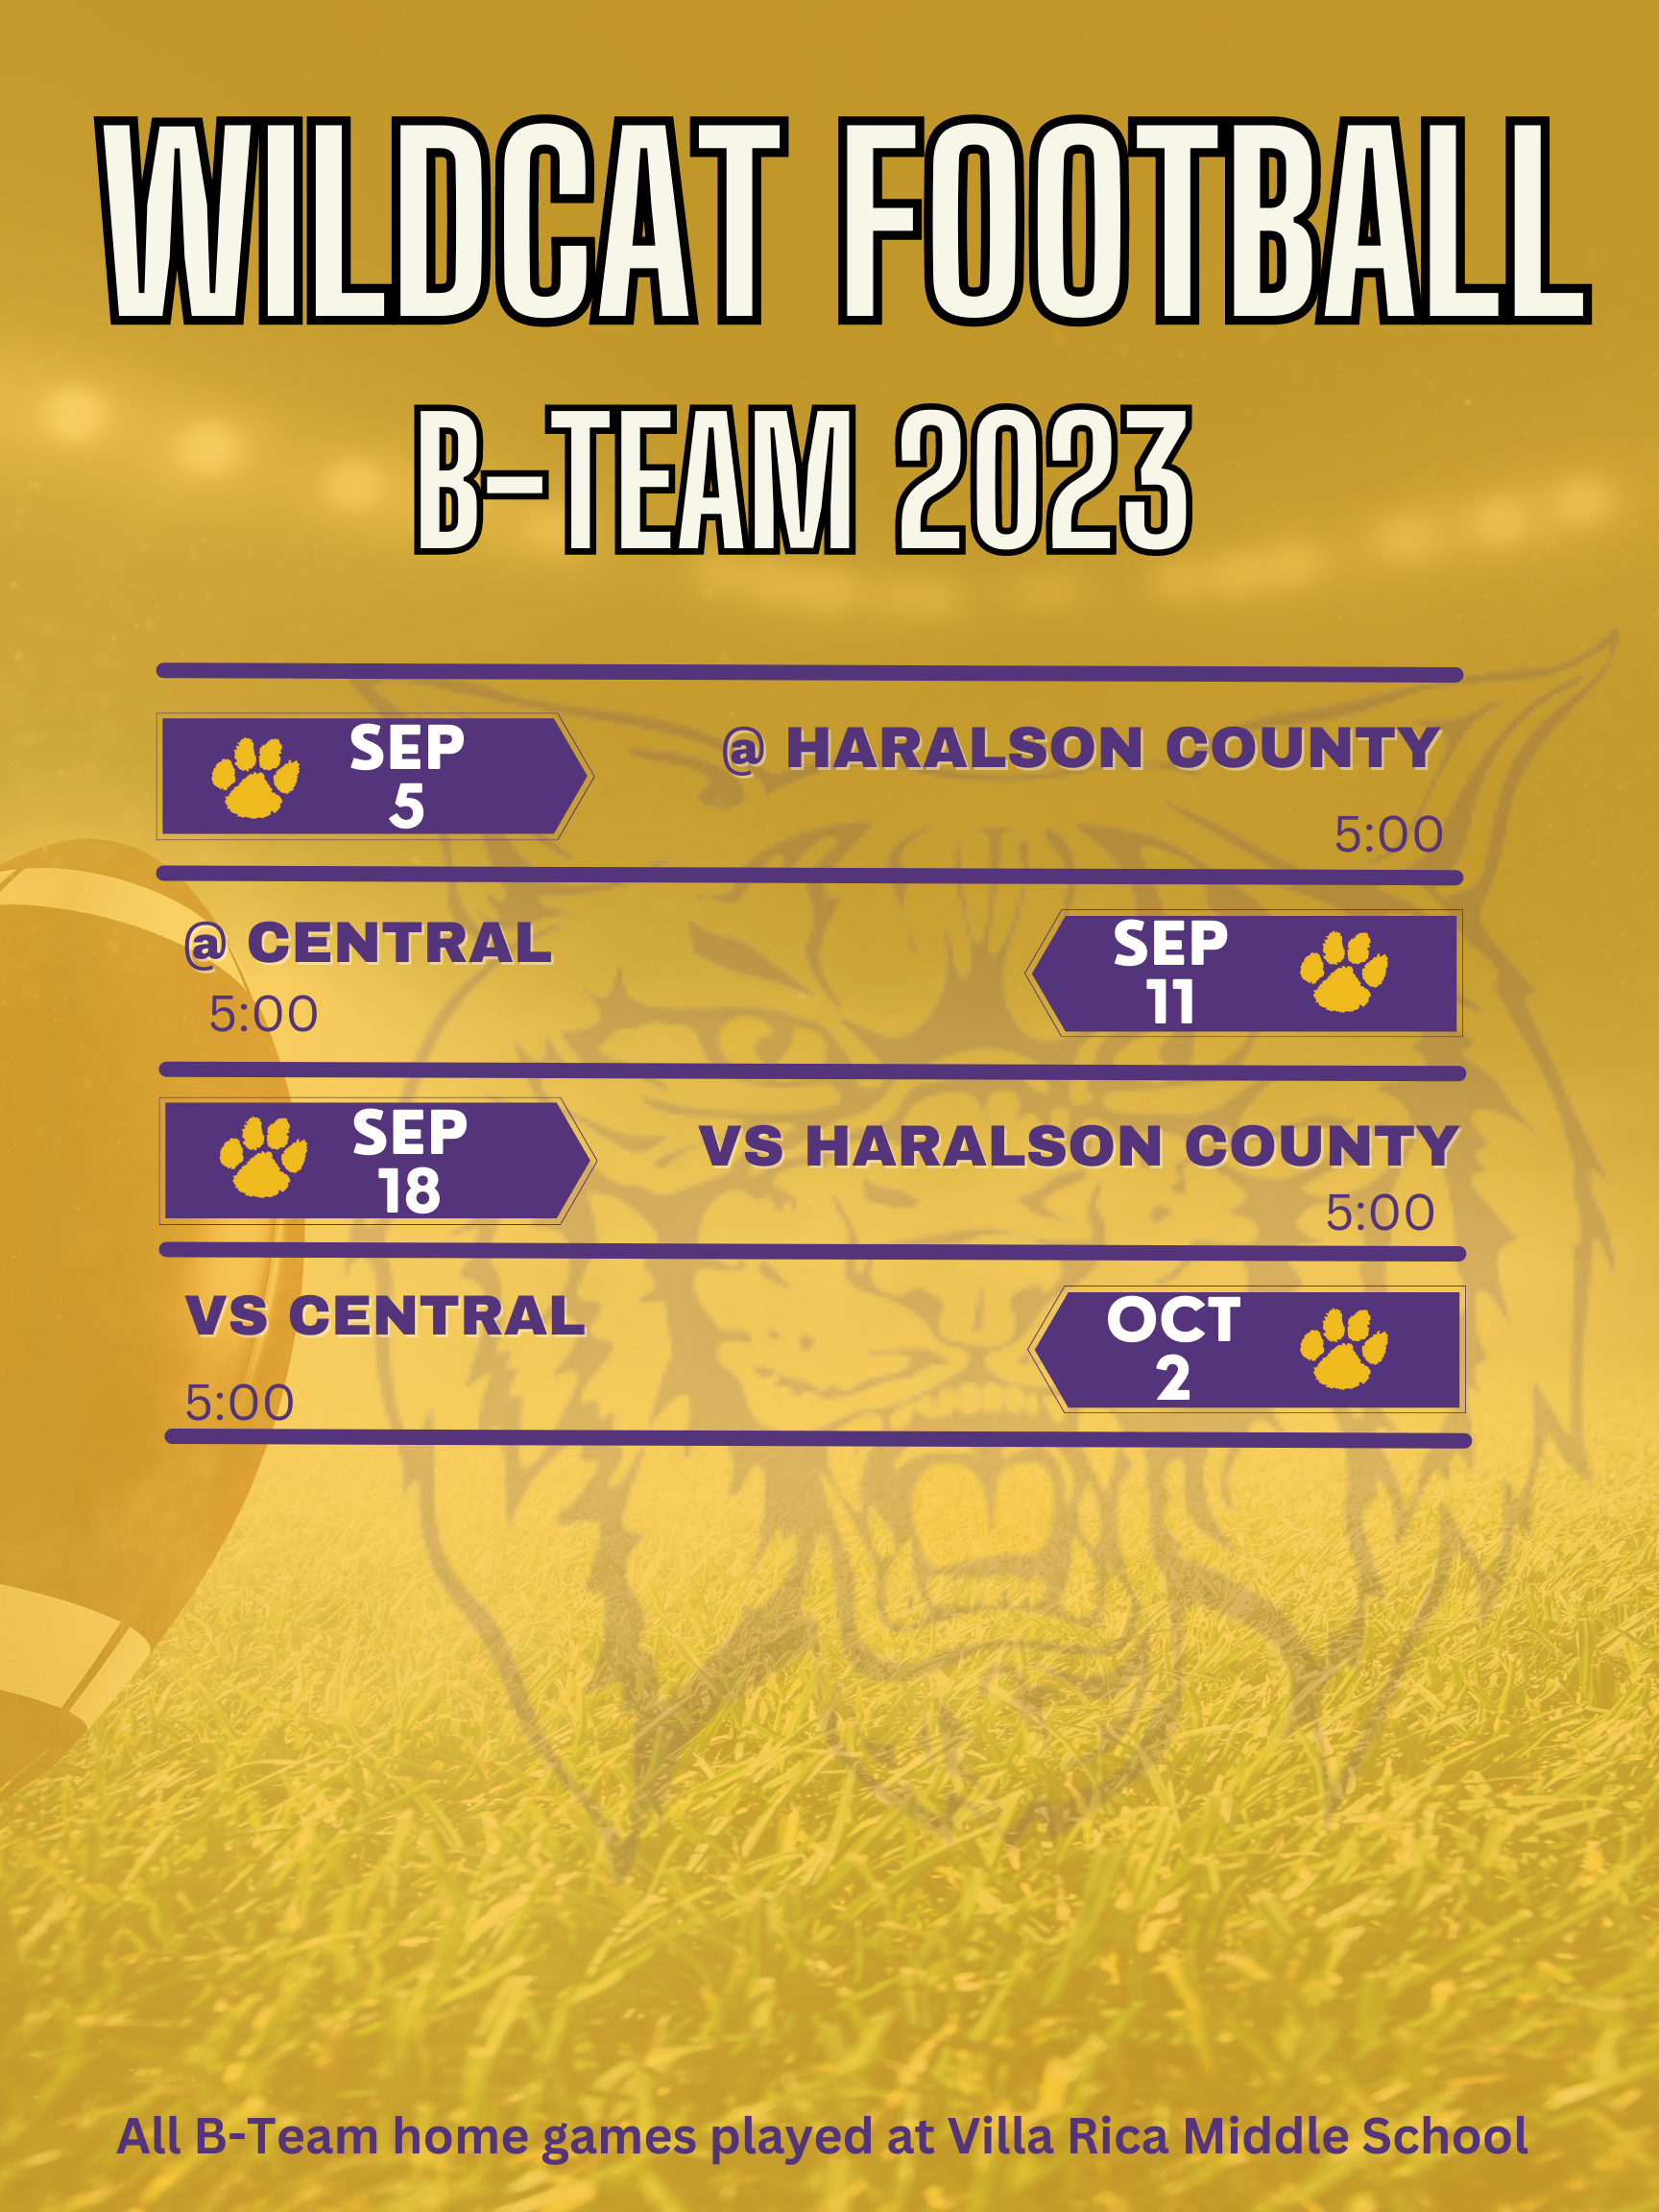 May be a graphic of basketball, football and text that says 'WILDCAT FOOTBALL B-TEAM 2023 SEP 5 HARALSON COUNTY 5:00 CENTRAL 5:00 SEP 11 SEP 18 vs CENTRAL vs HARALSON COUNTY 5:00 OCT 2 All B-Team home games played at Villa Rica Middle School